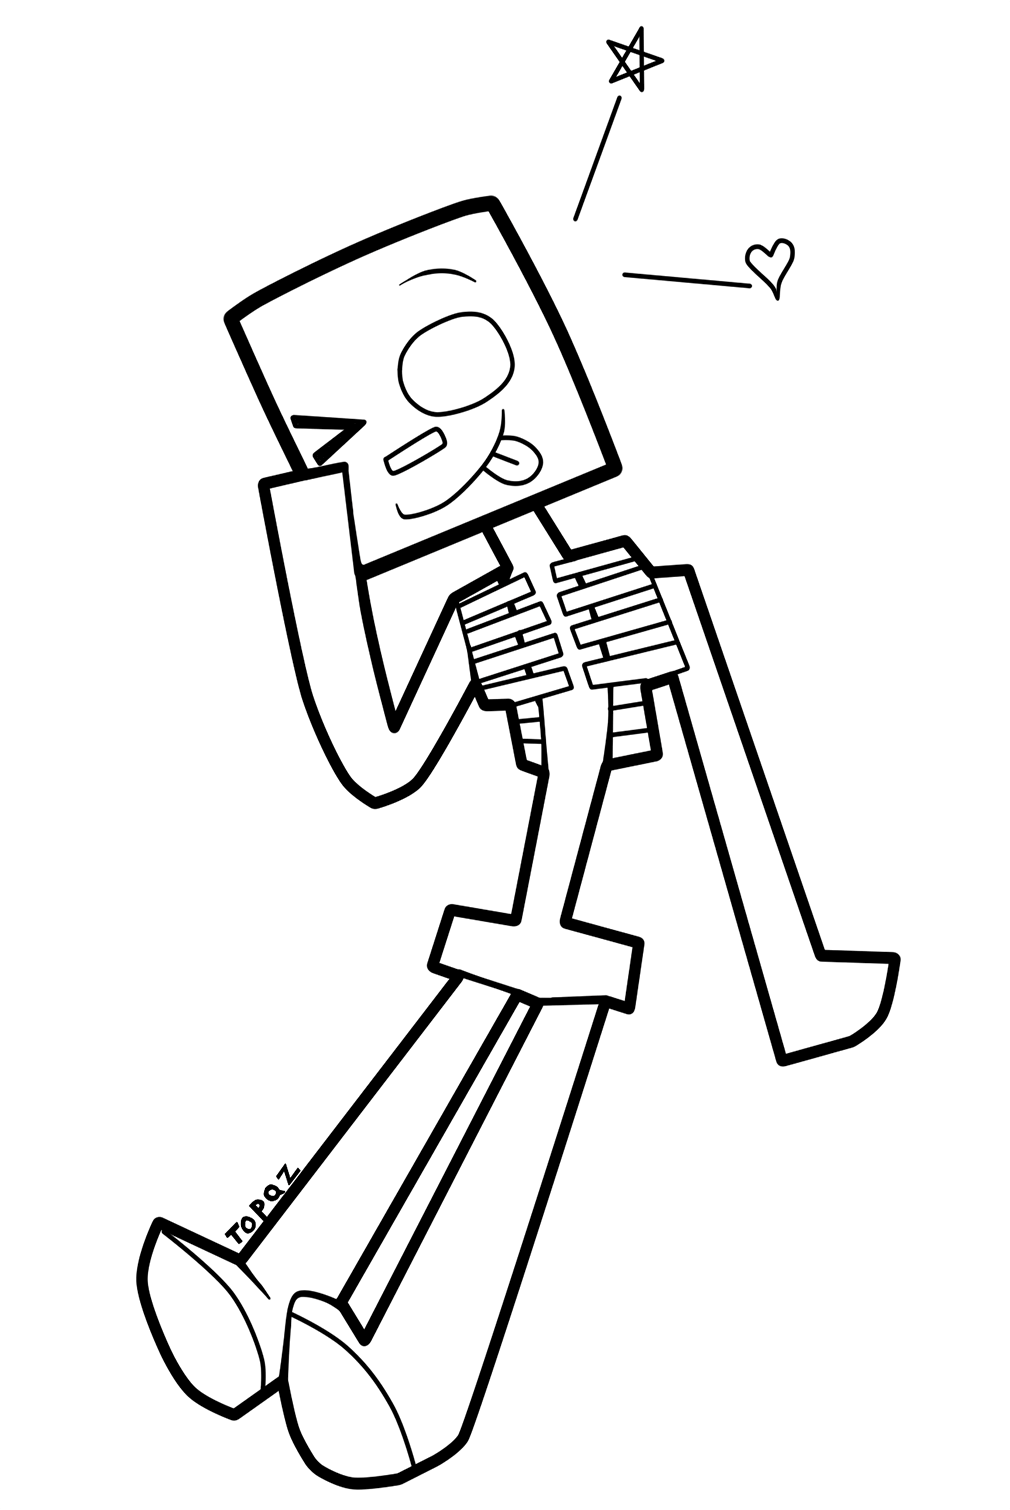 Minecraft Cartoon Skeleton Coloring Pages